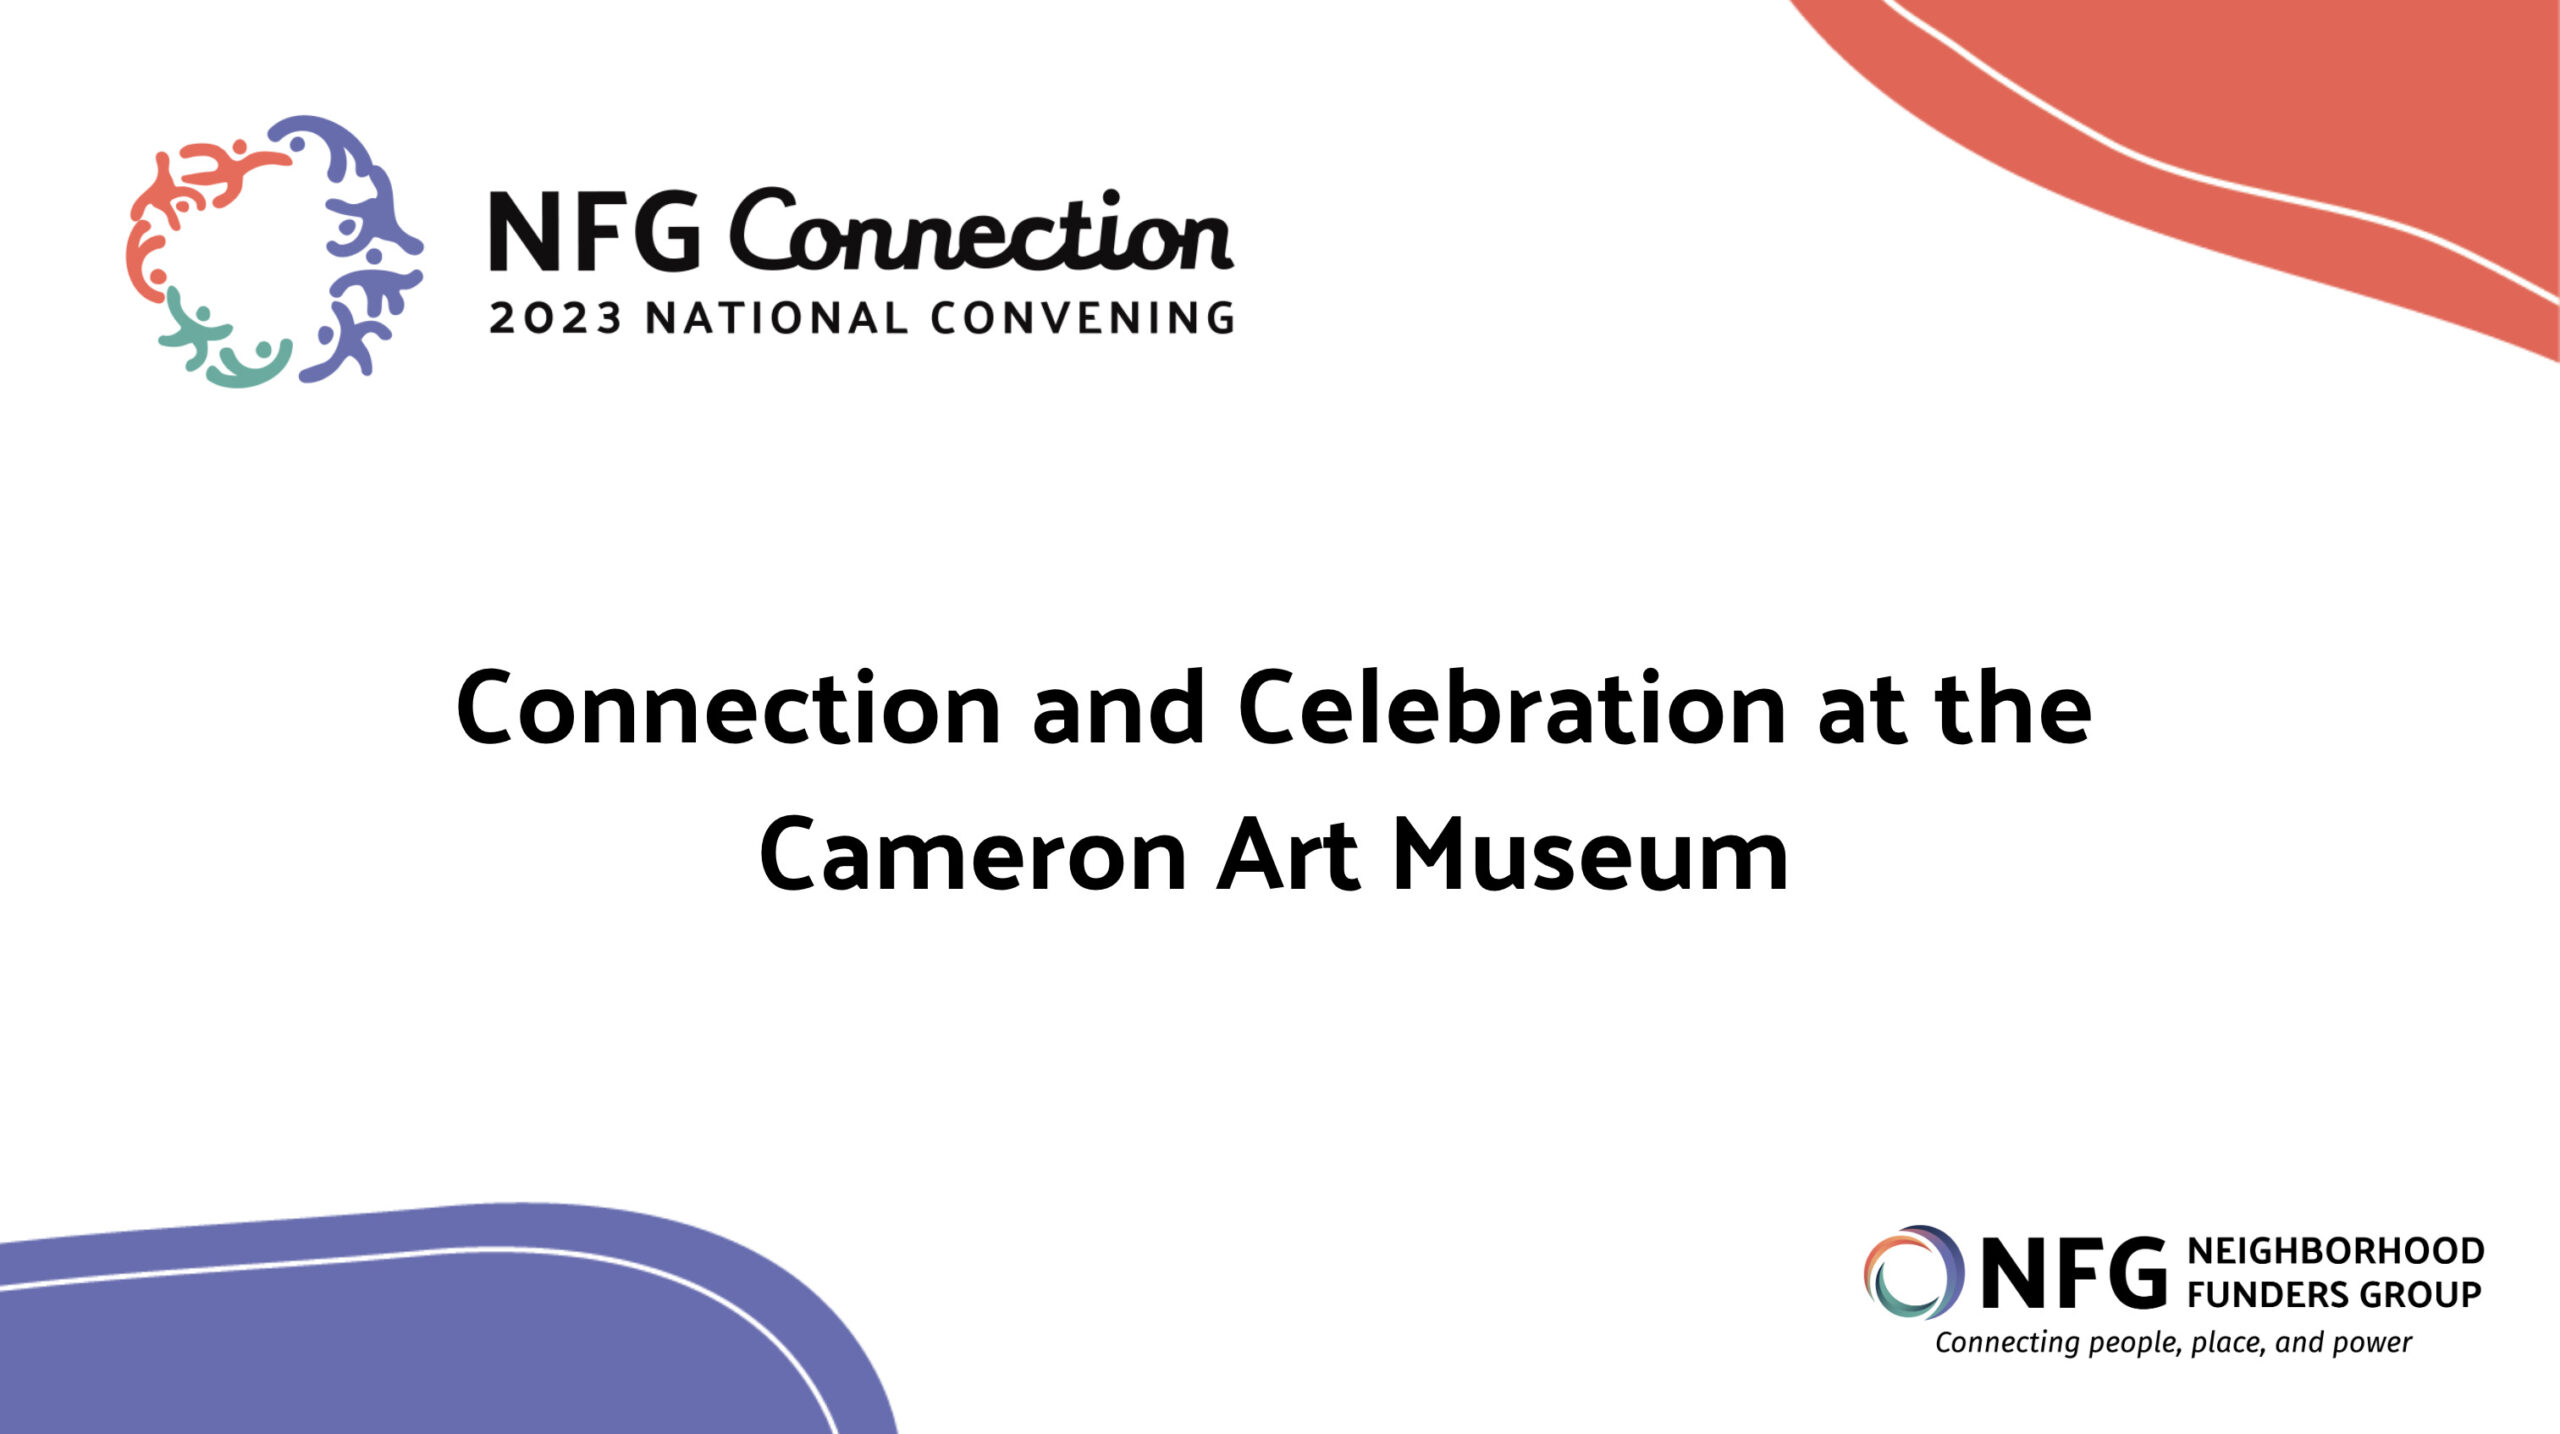 Title card for NFG's 2023 National Convening "Celebration and Connection at the Cameron Art Museum"